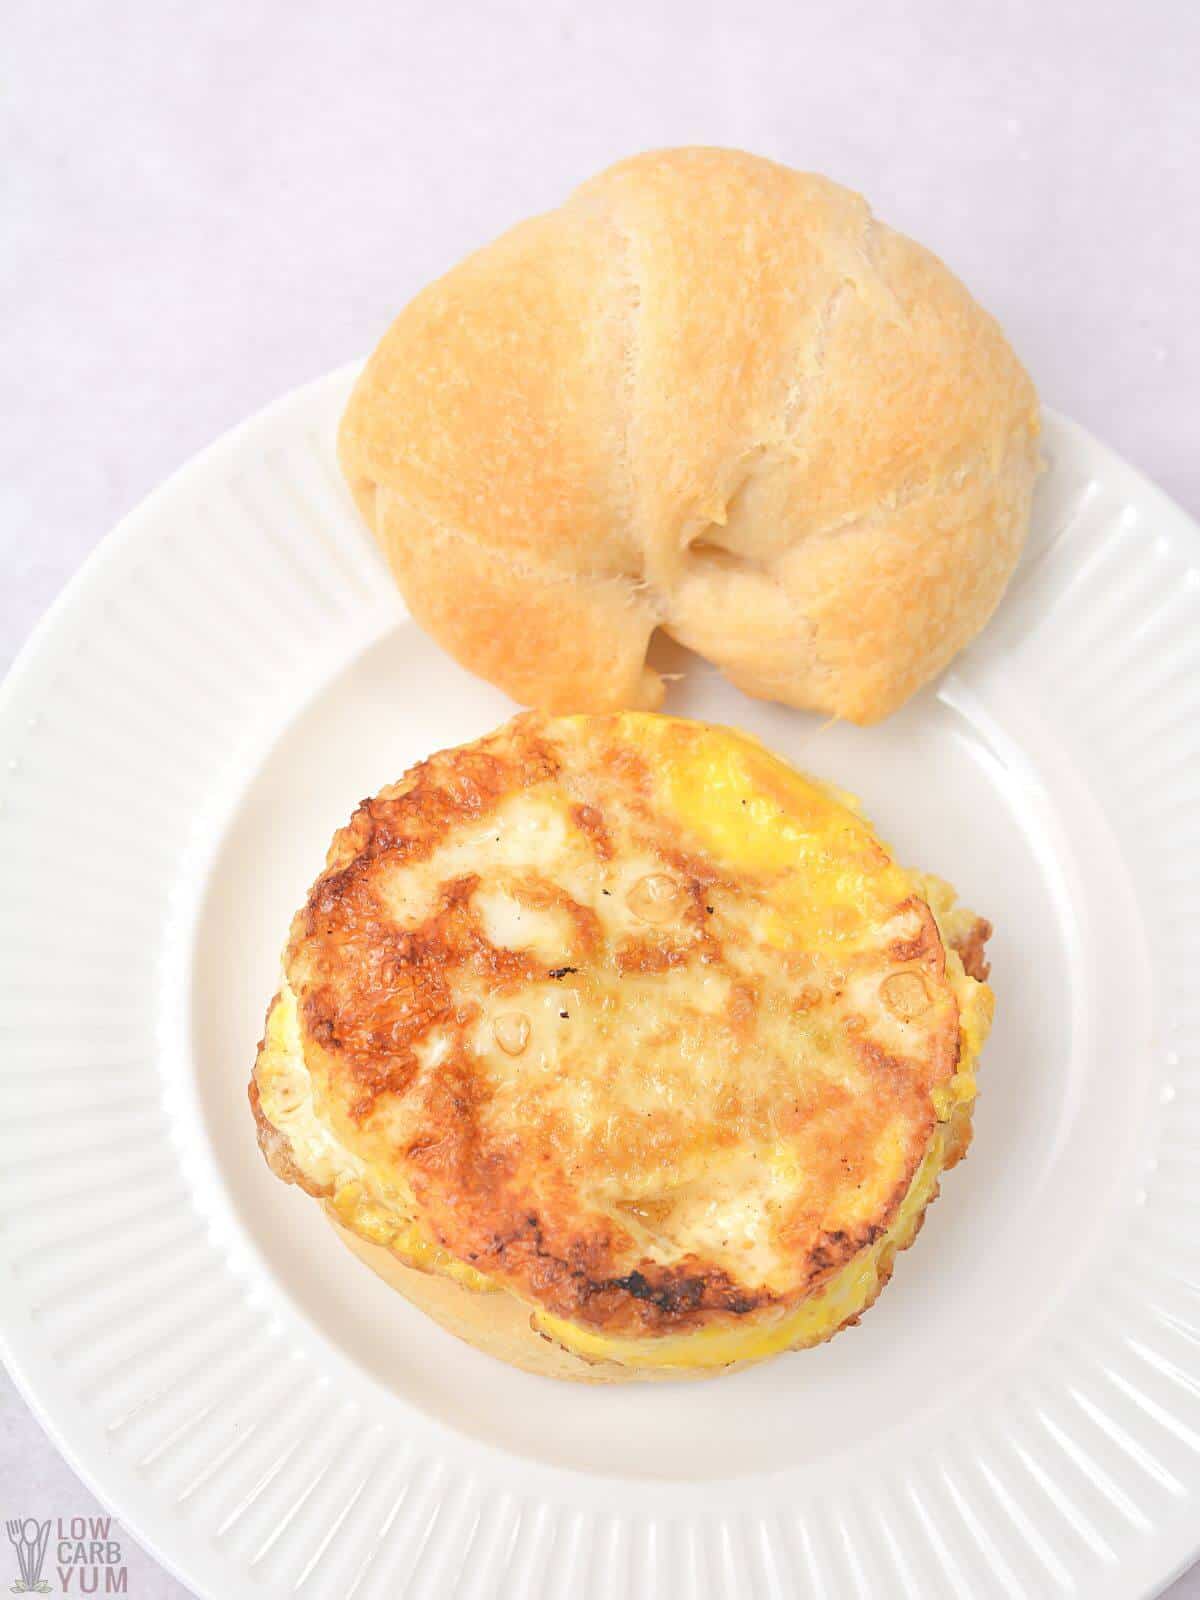 cooked egg ring on croissant roll.